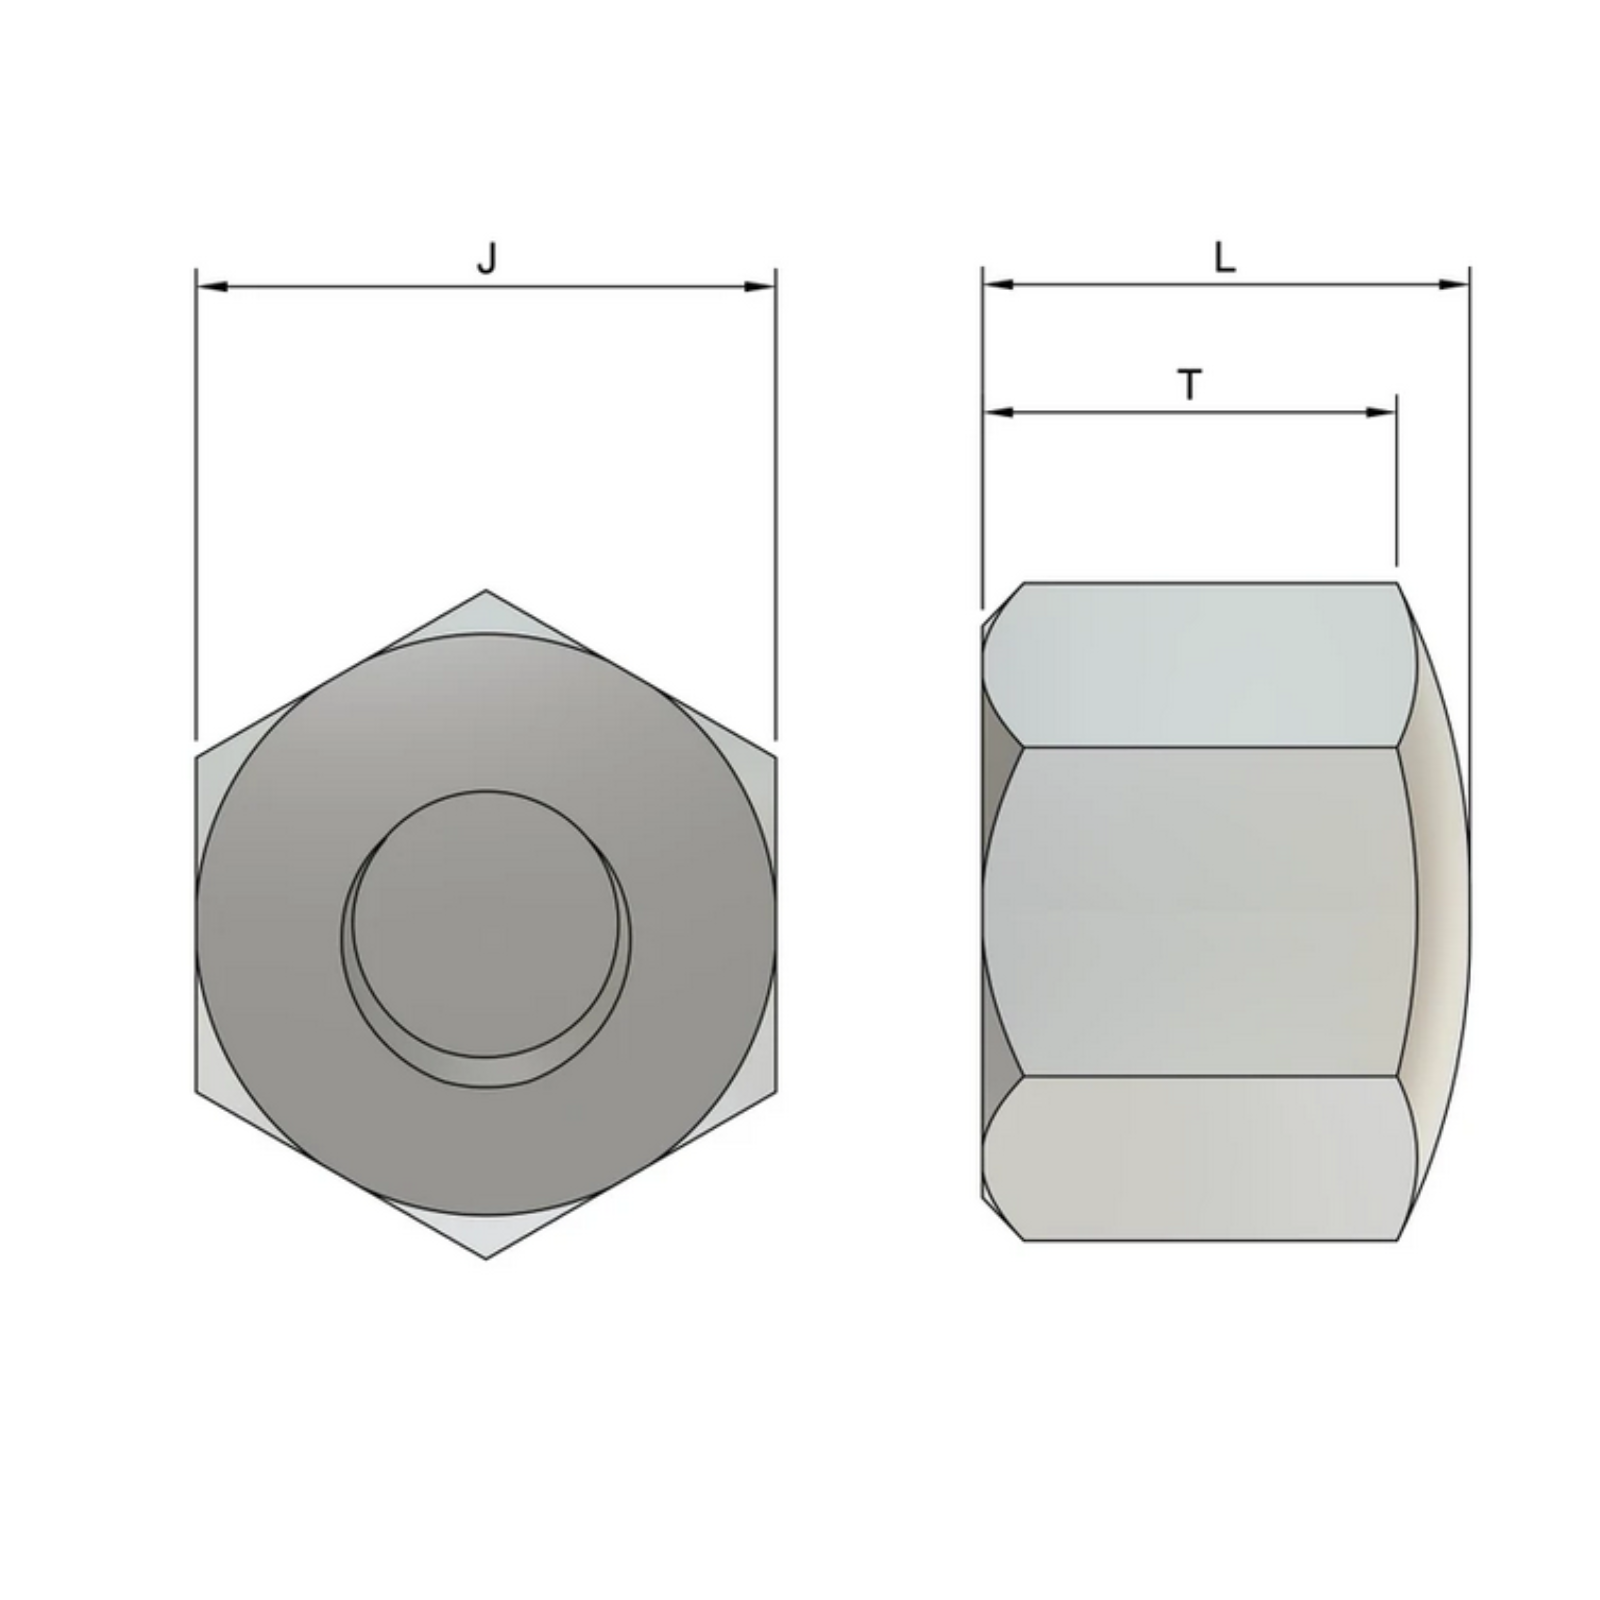 M12 Cap Nuts (DIN 917) - Stainless Steel (A2)